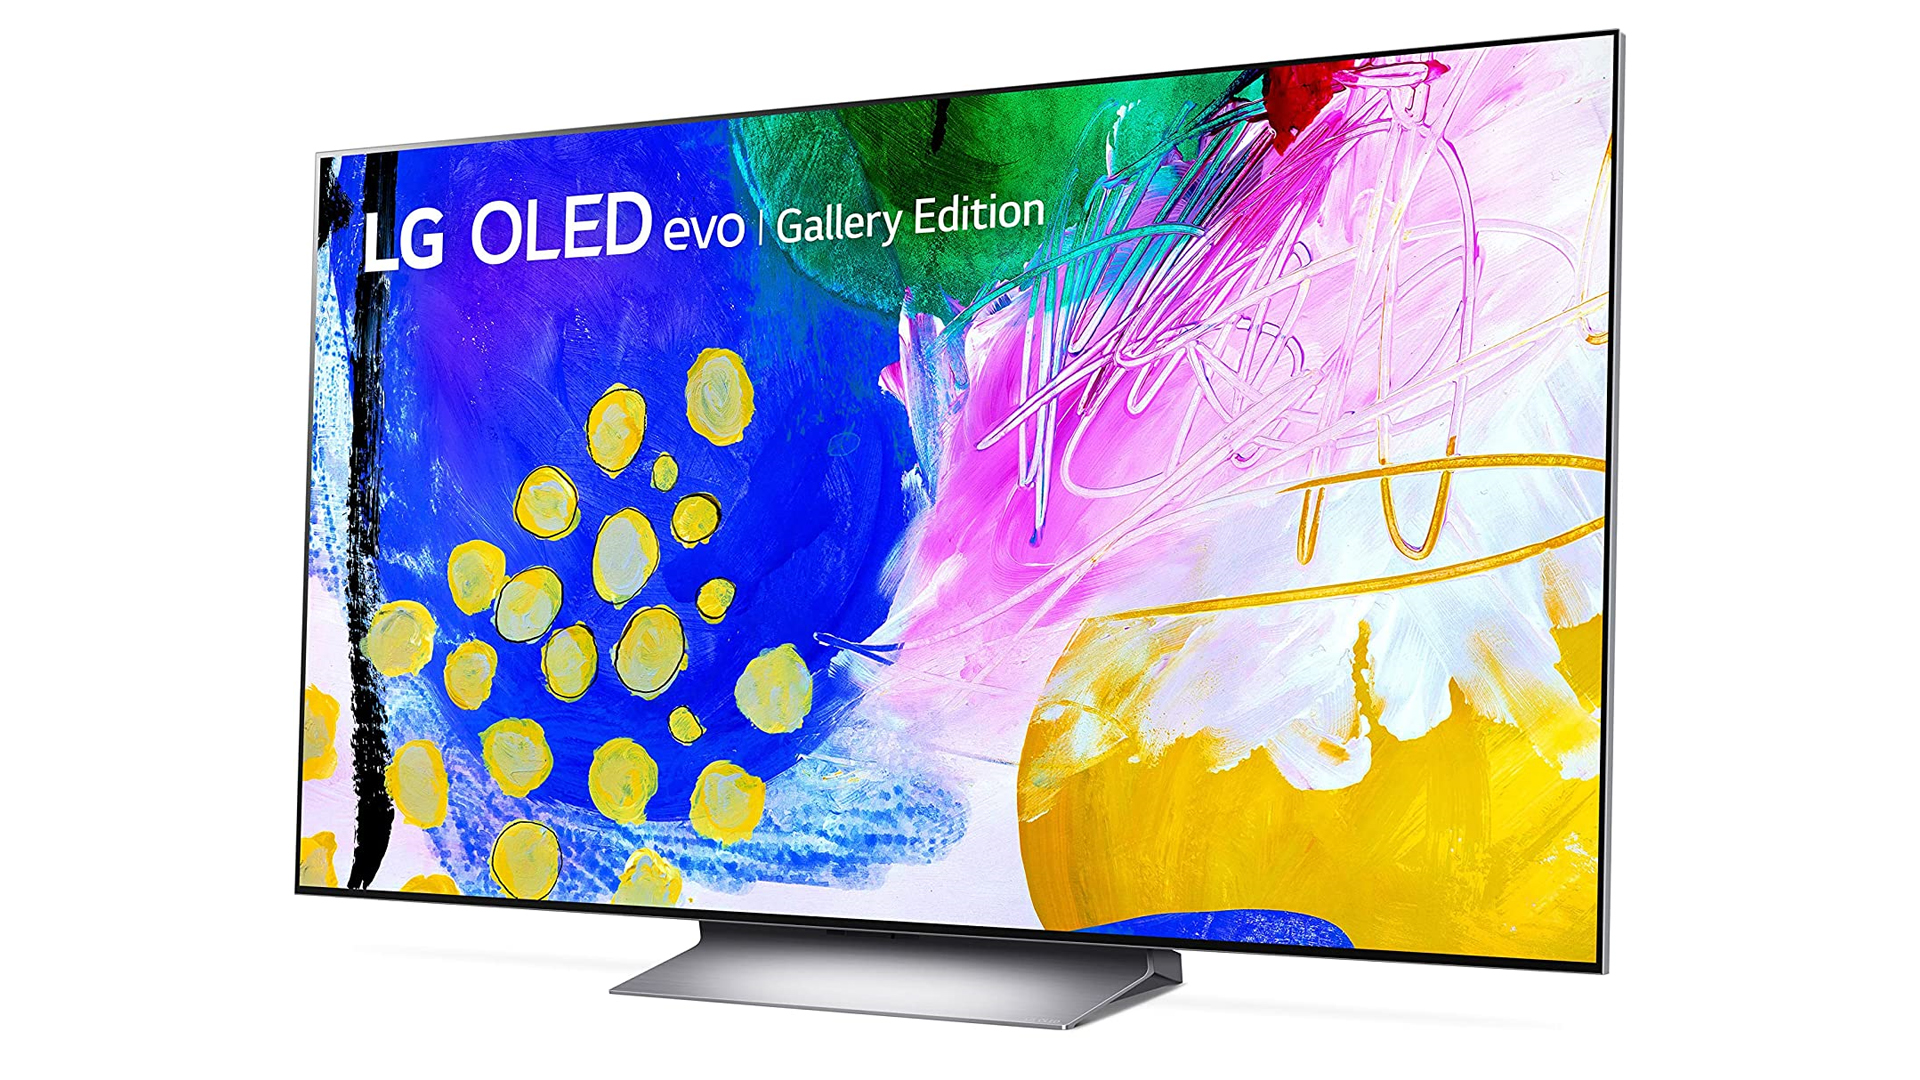 The LG G2 evo Gallery Edition OLED TV